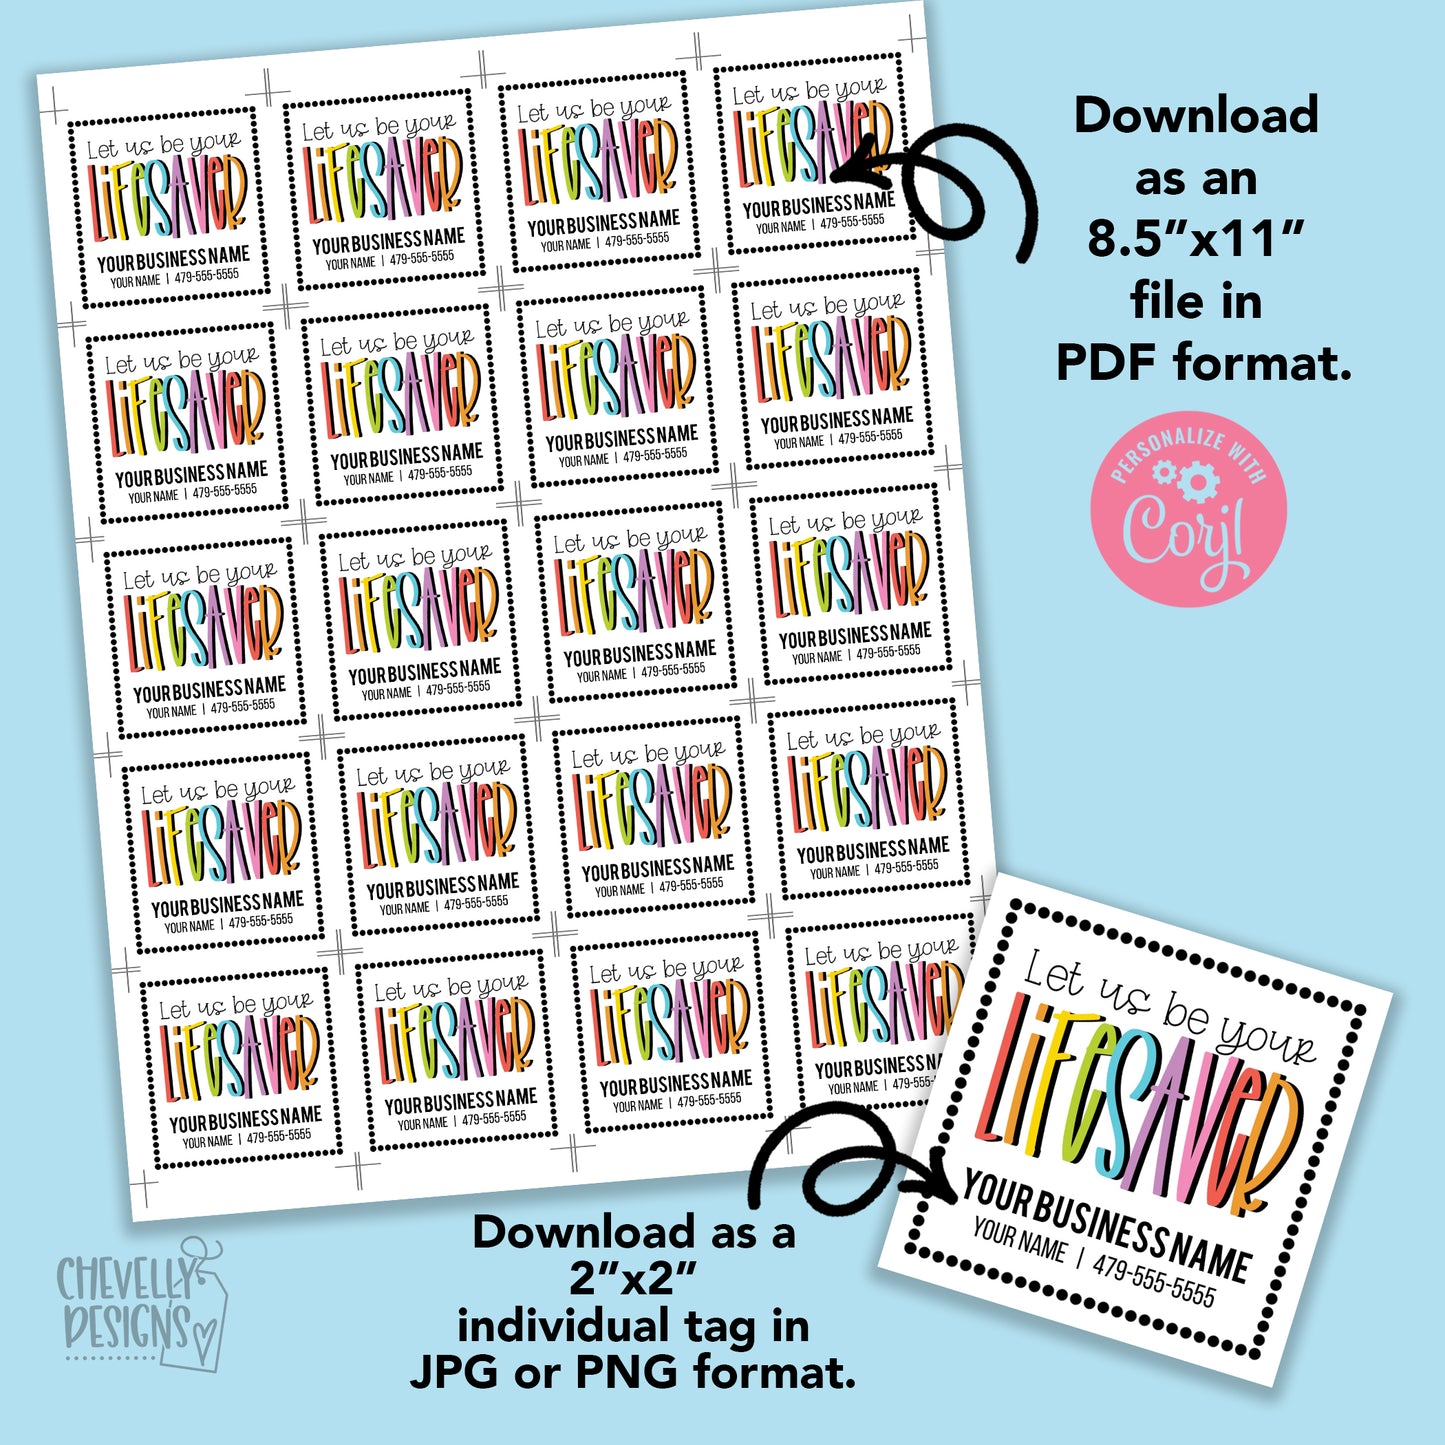 Editable - Let Us Be Your Lifesavers - Referral Gift Tags for Business Marketing - Printable - Digital File